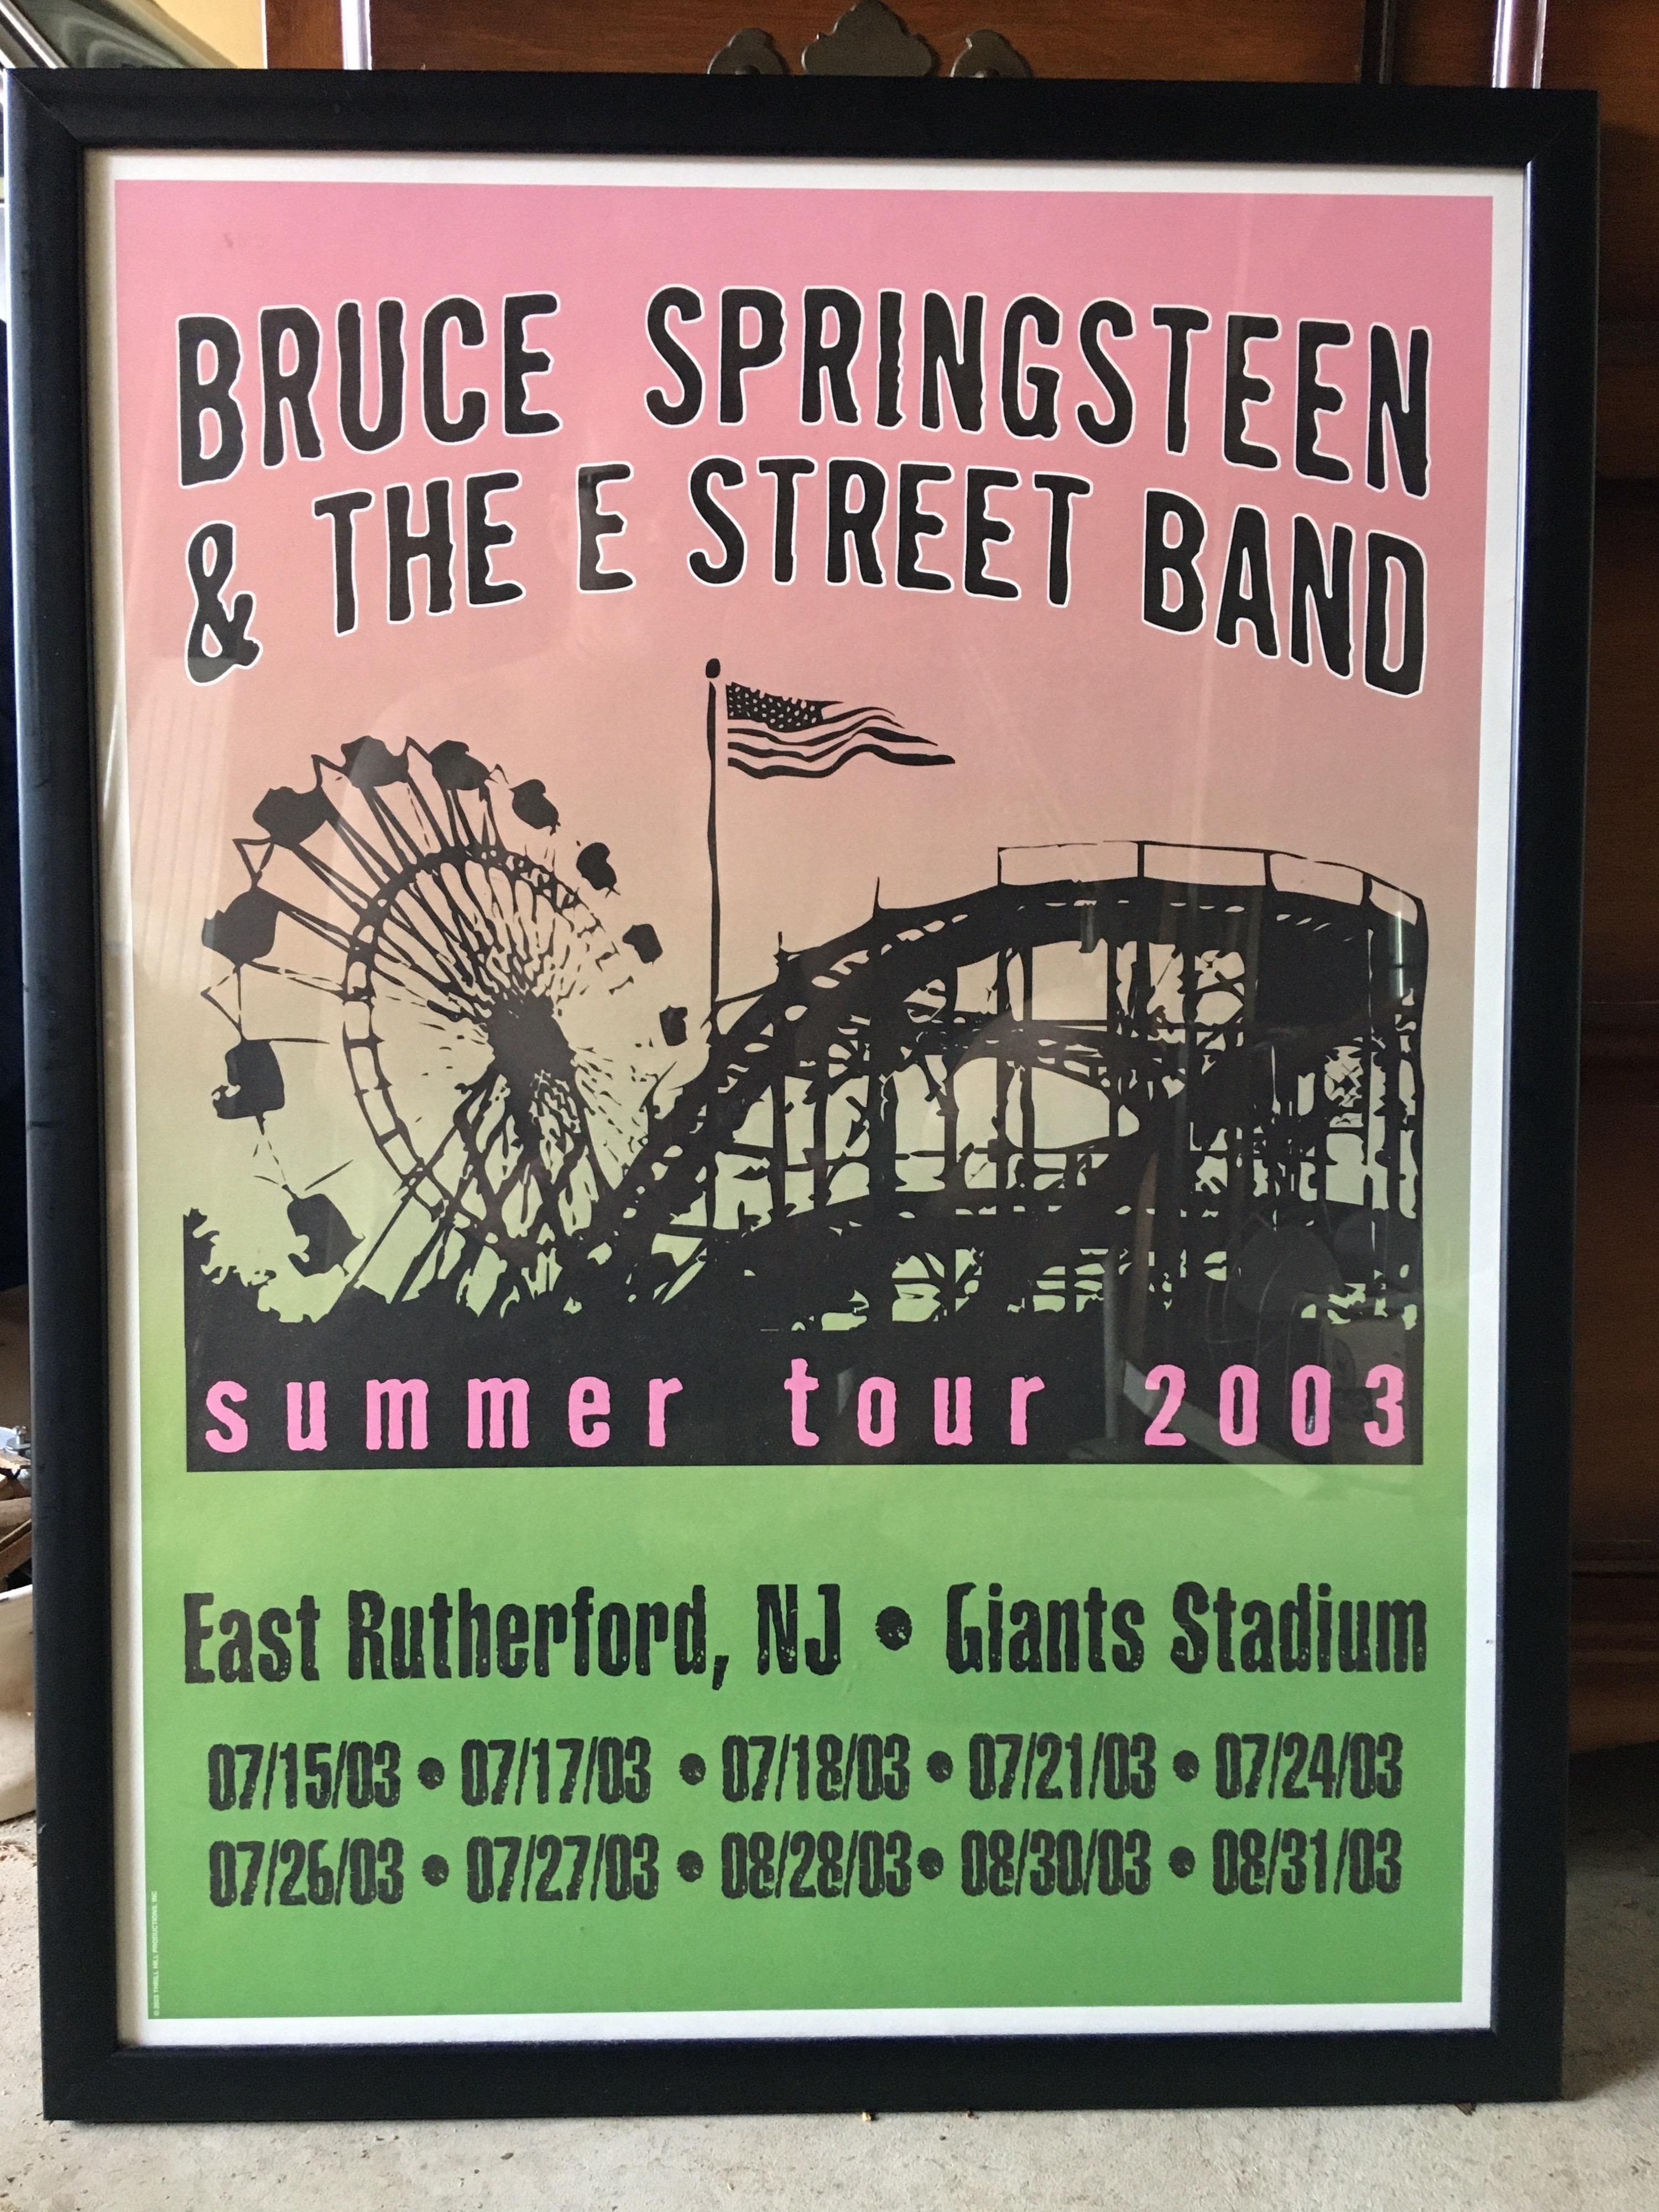 Bruce Springsteen Summer Tour 2003 original poster. Nice colors and design!